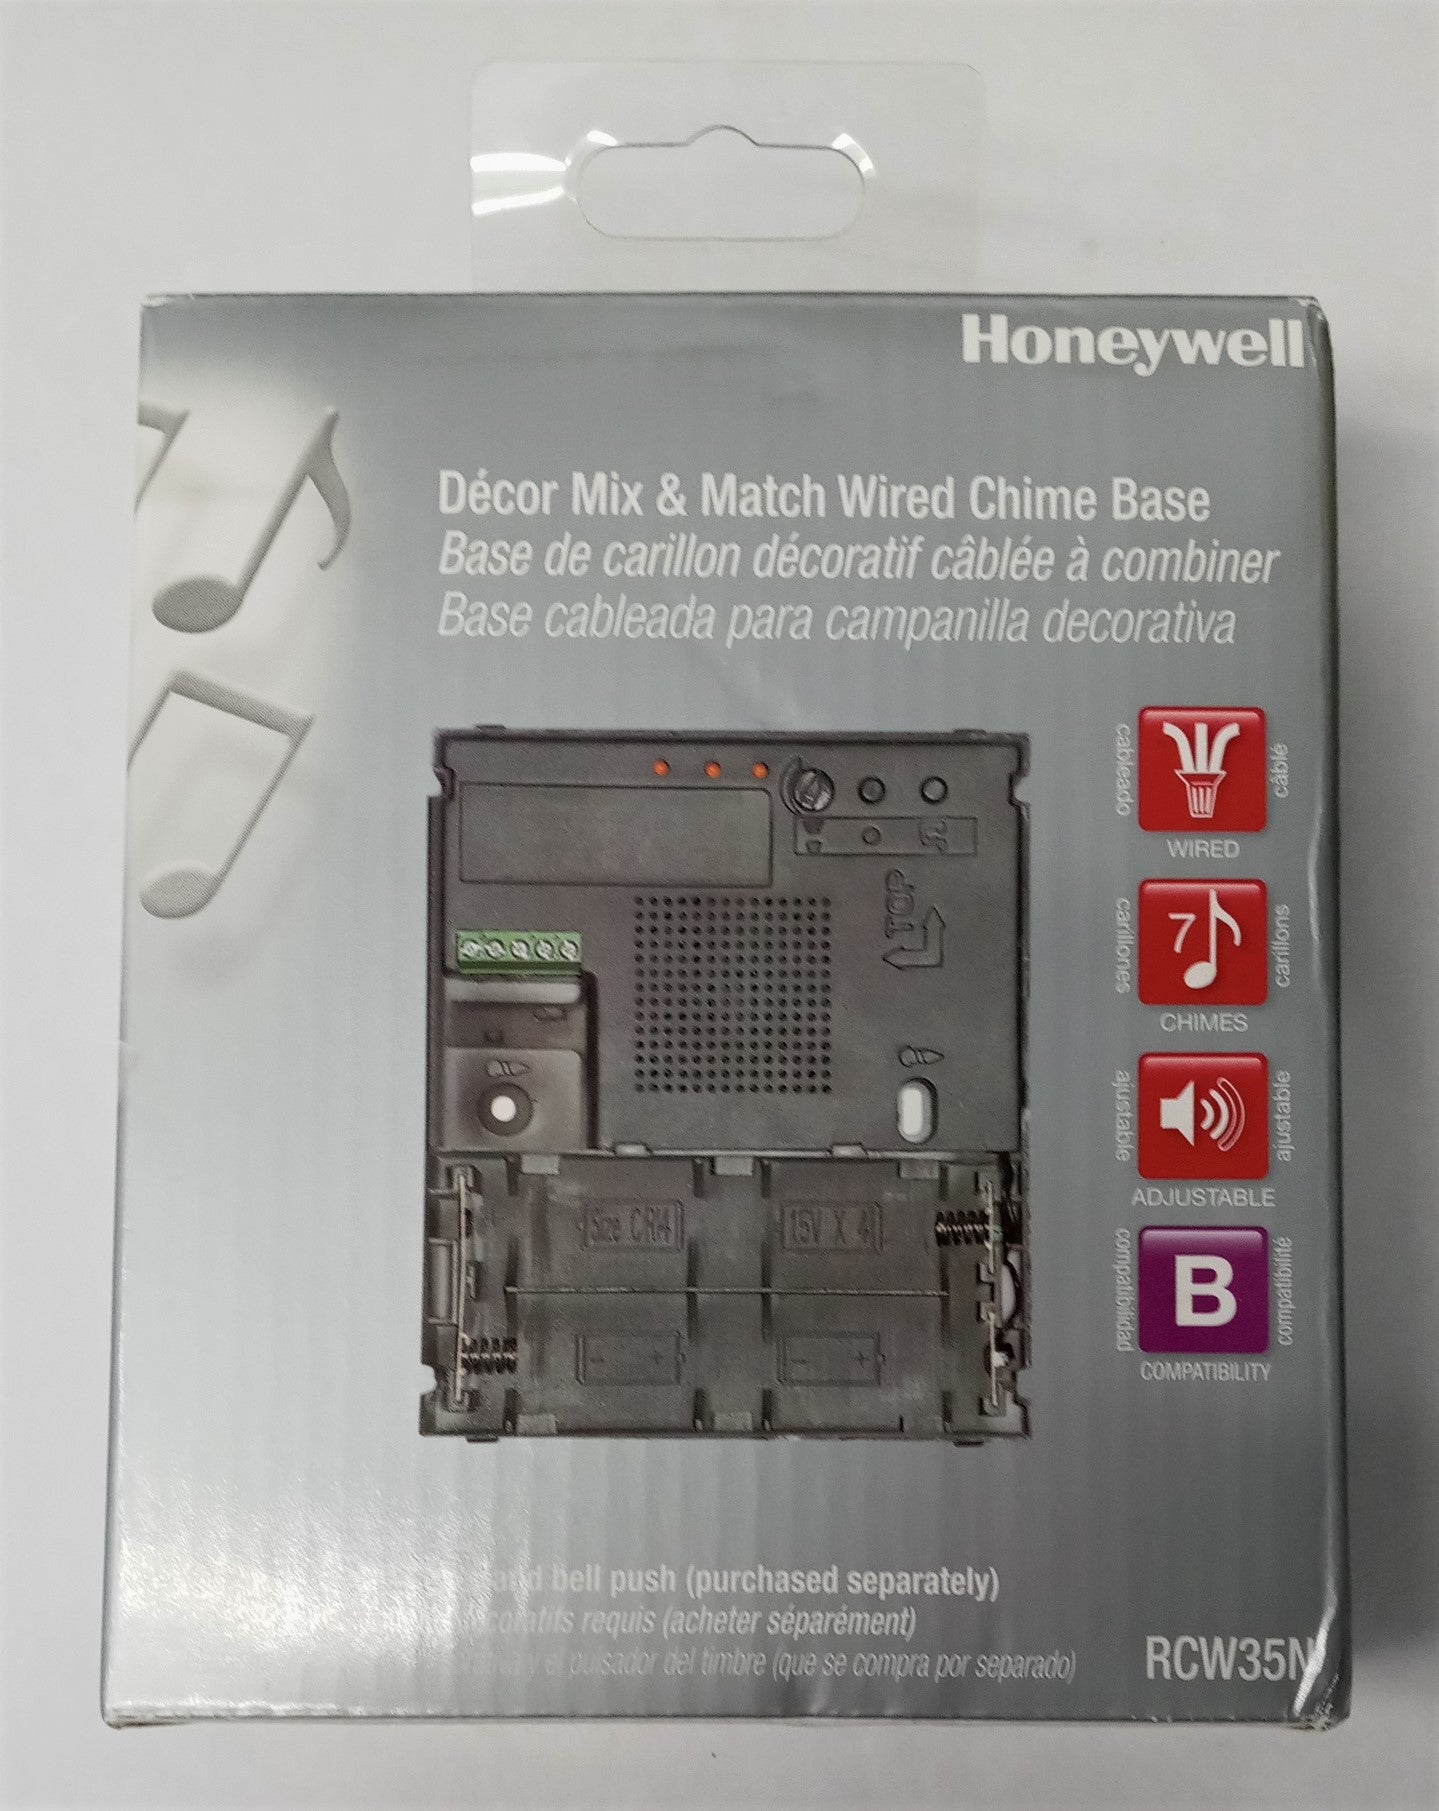 Honeywell RCW35N Décor Mix & Match Wired Chime Base